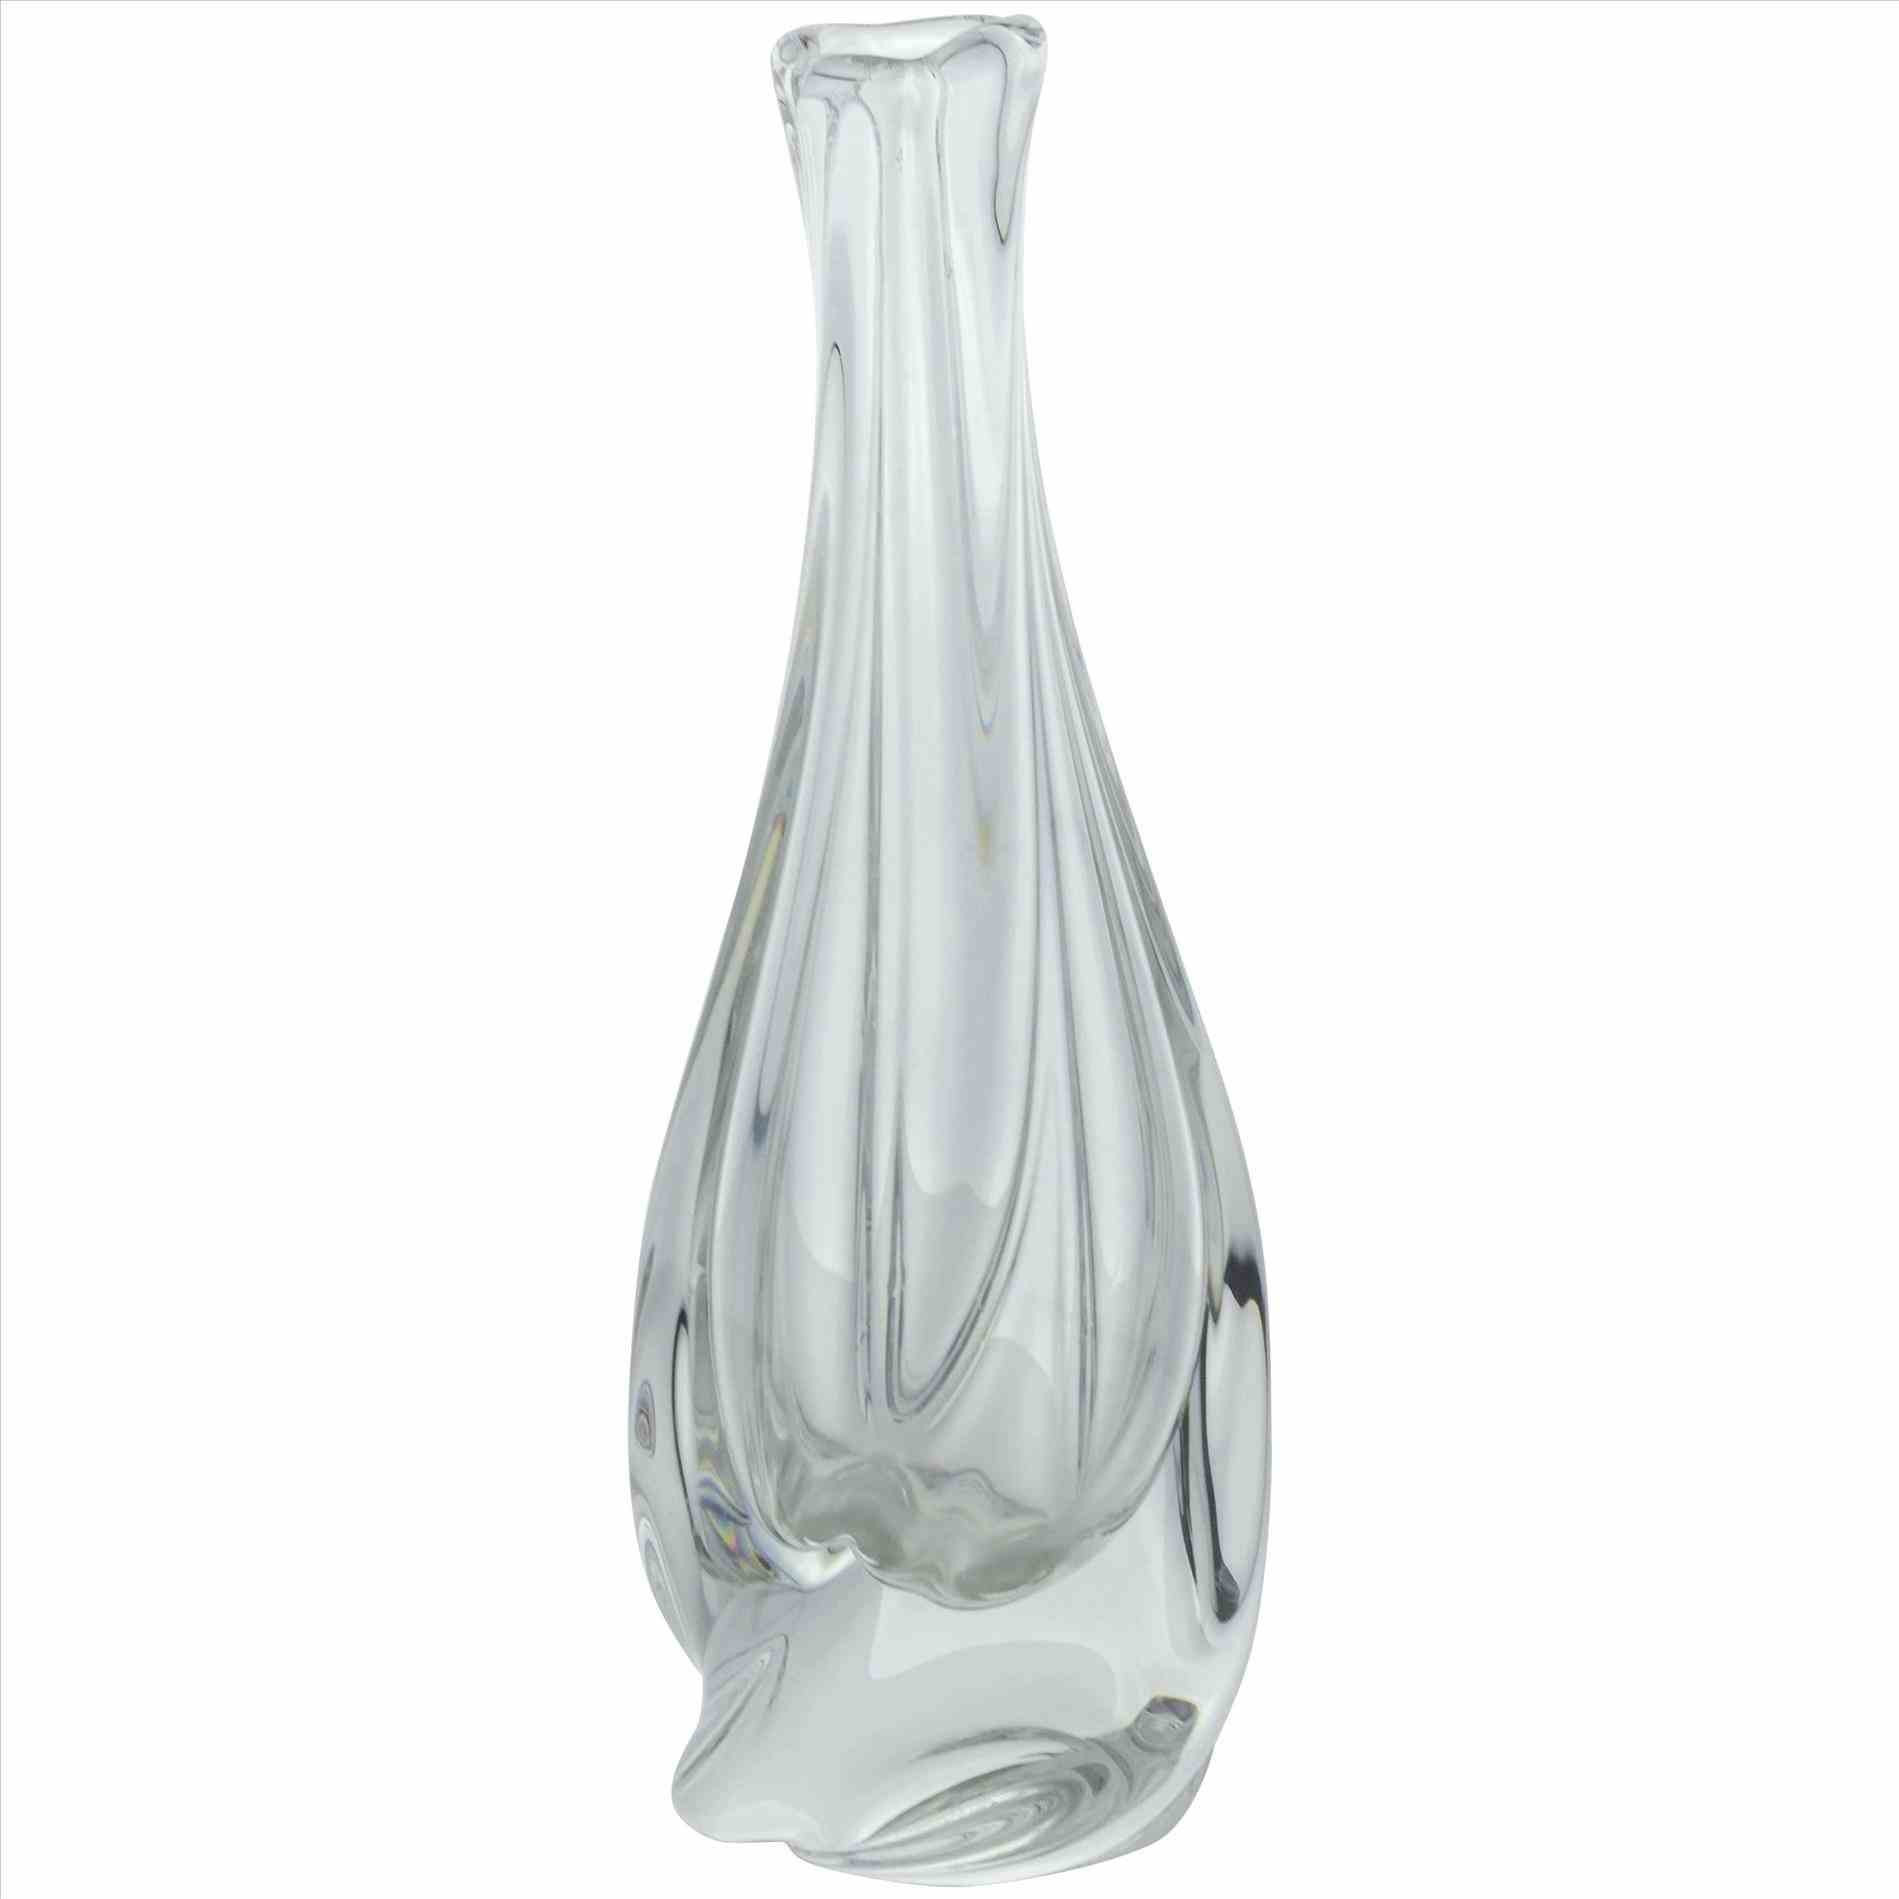 cheap glass flower vases wholesale of silver vases wholesale pandoraocharms us in silver vases wholesale for u flowers and supplies